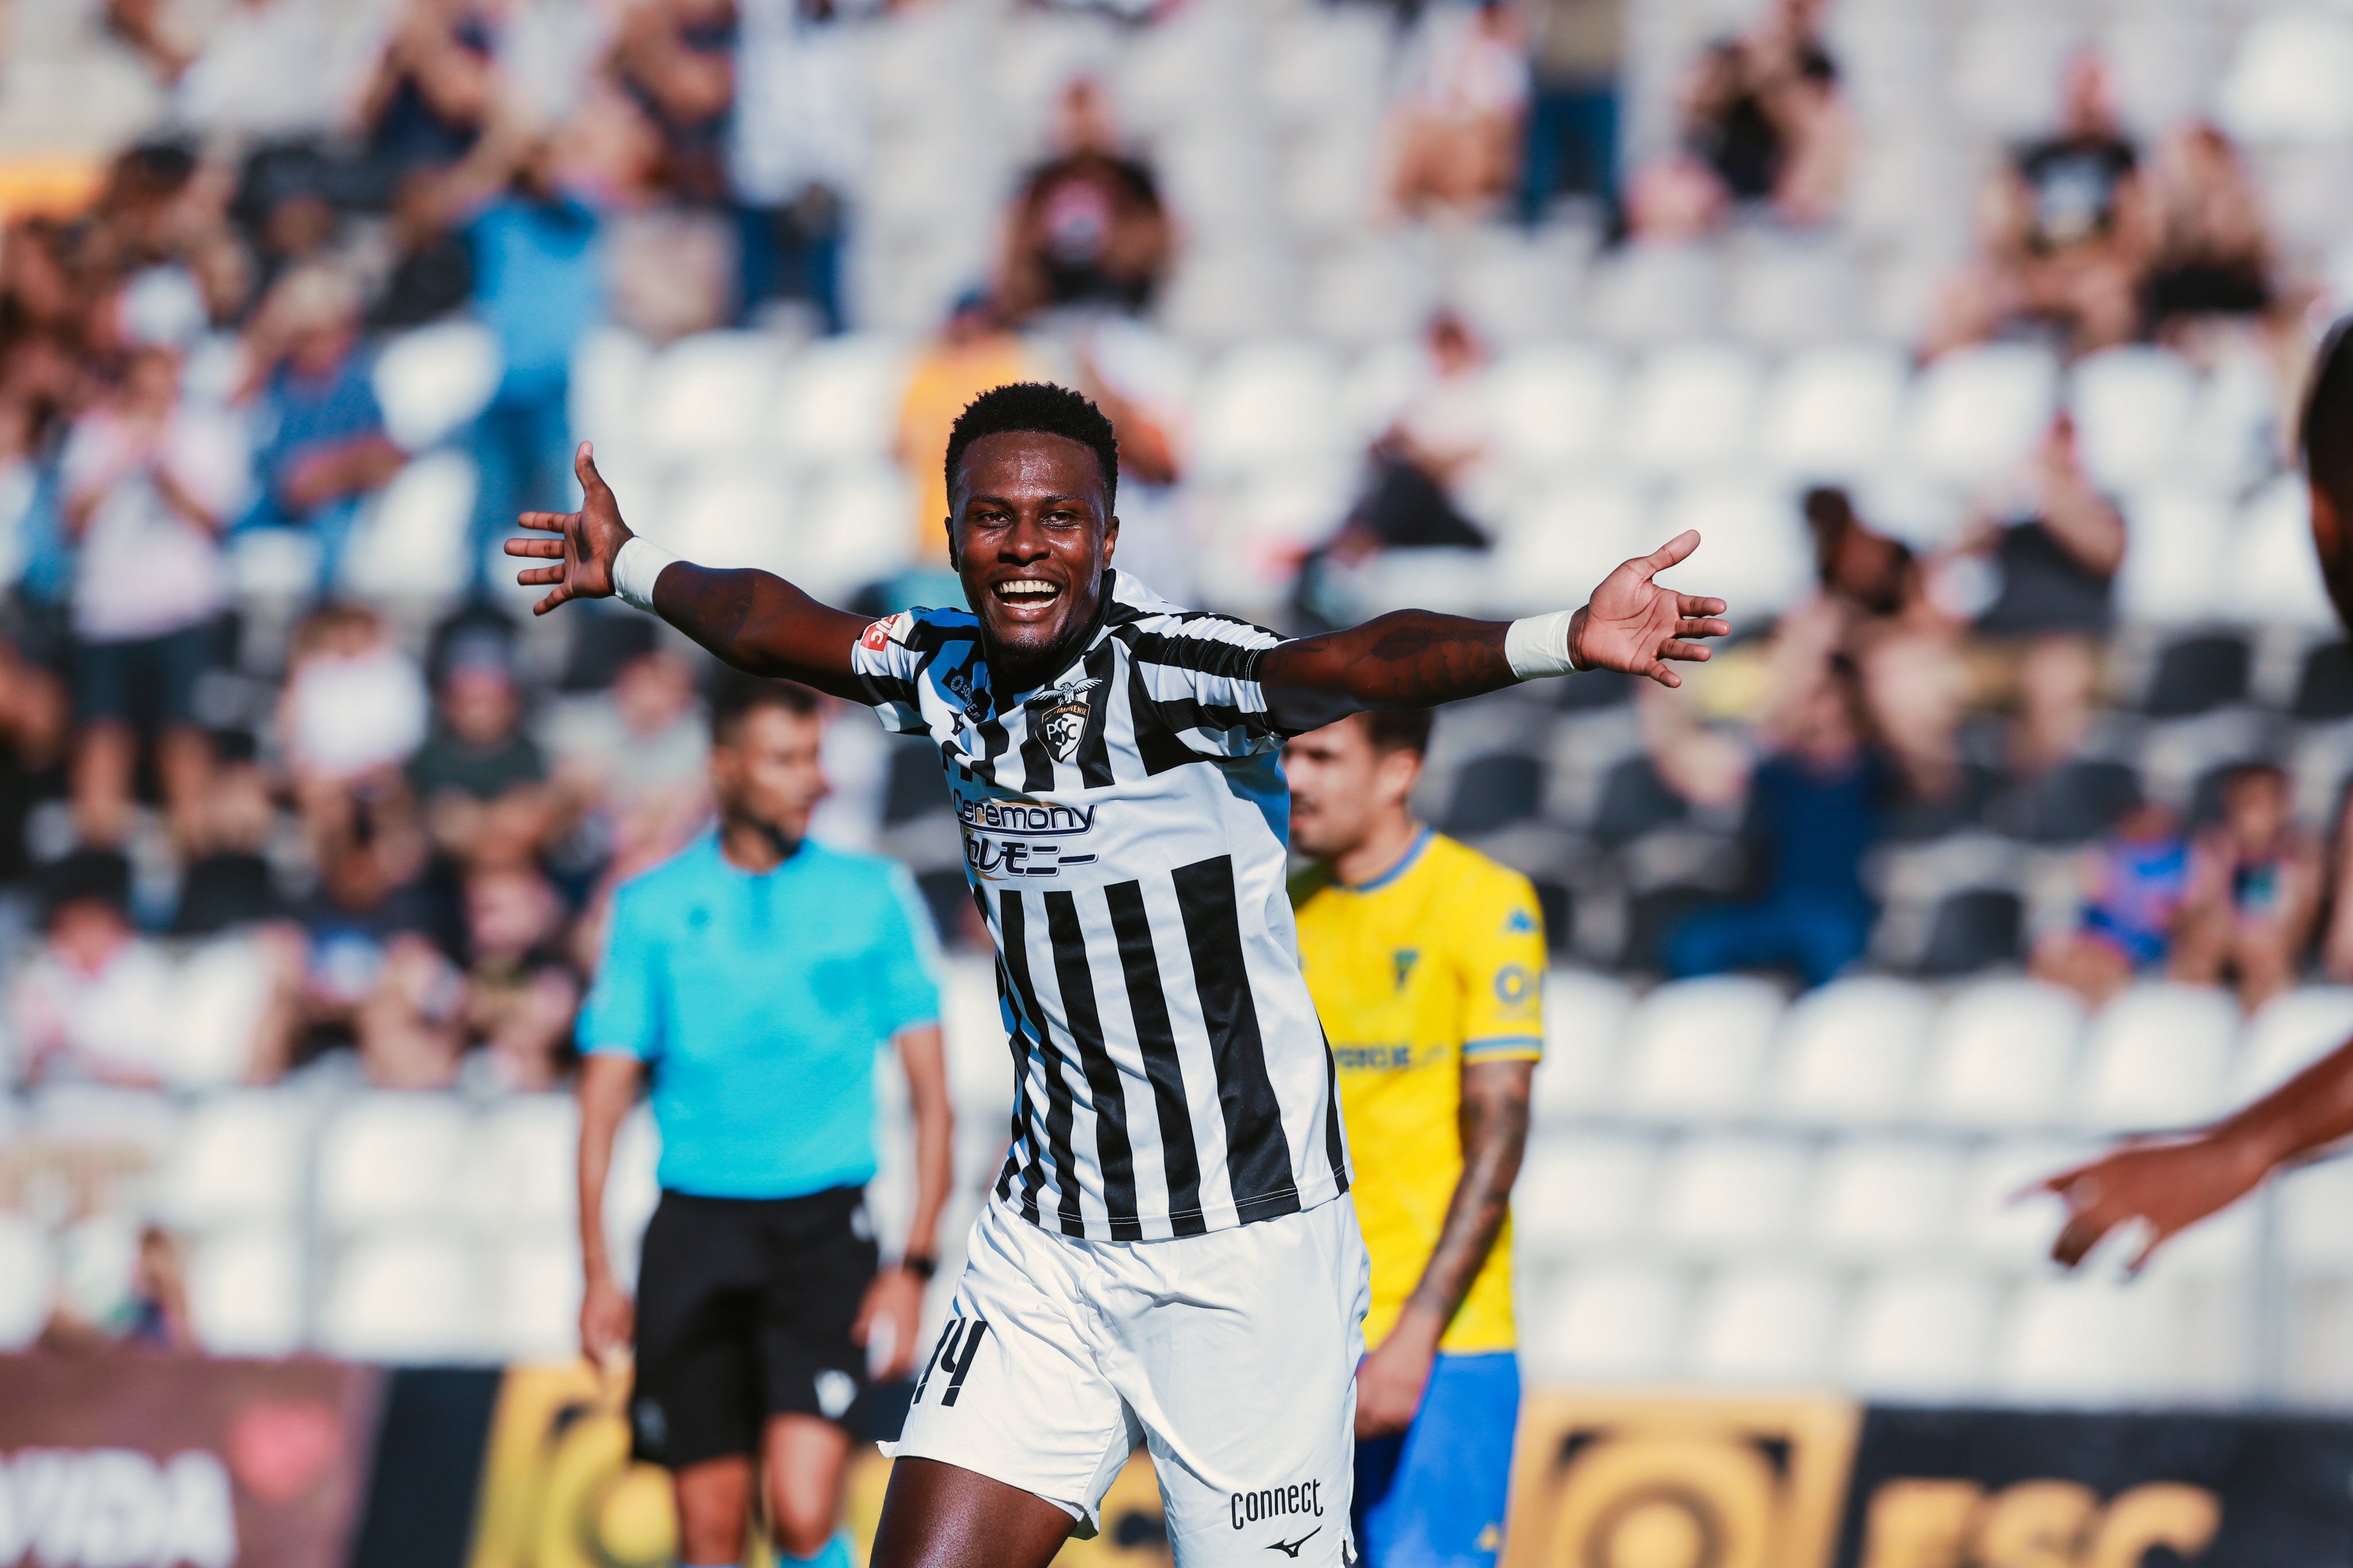 Portimonense highlights: Vinicius was a giant in closing down the goal